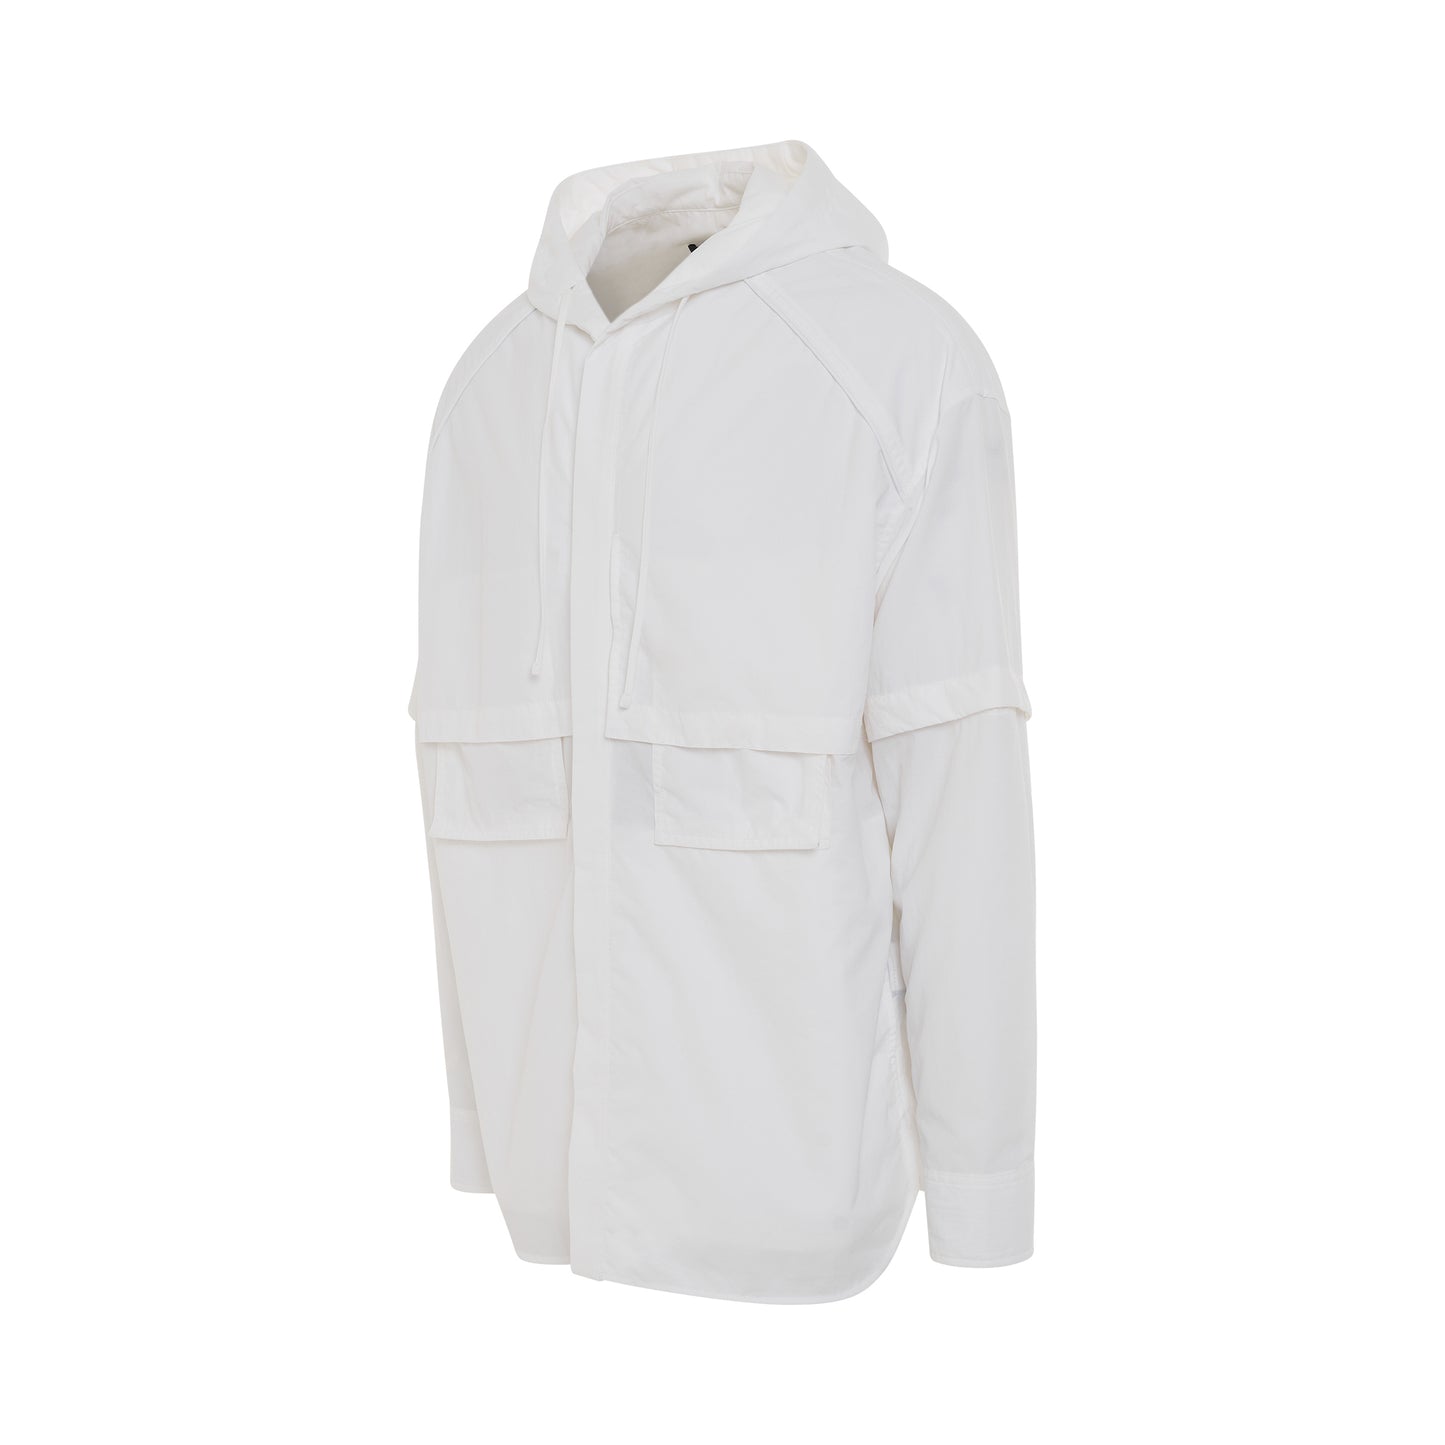 Double Sleeve Shirt Style Hoodie in White